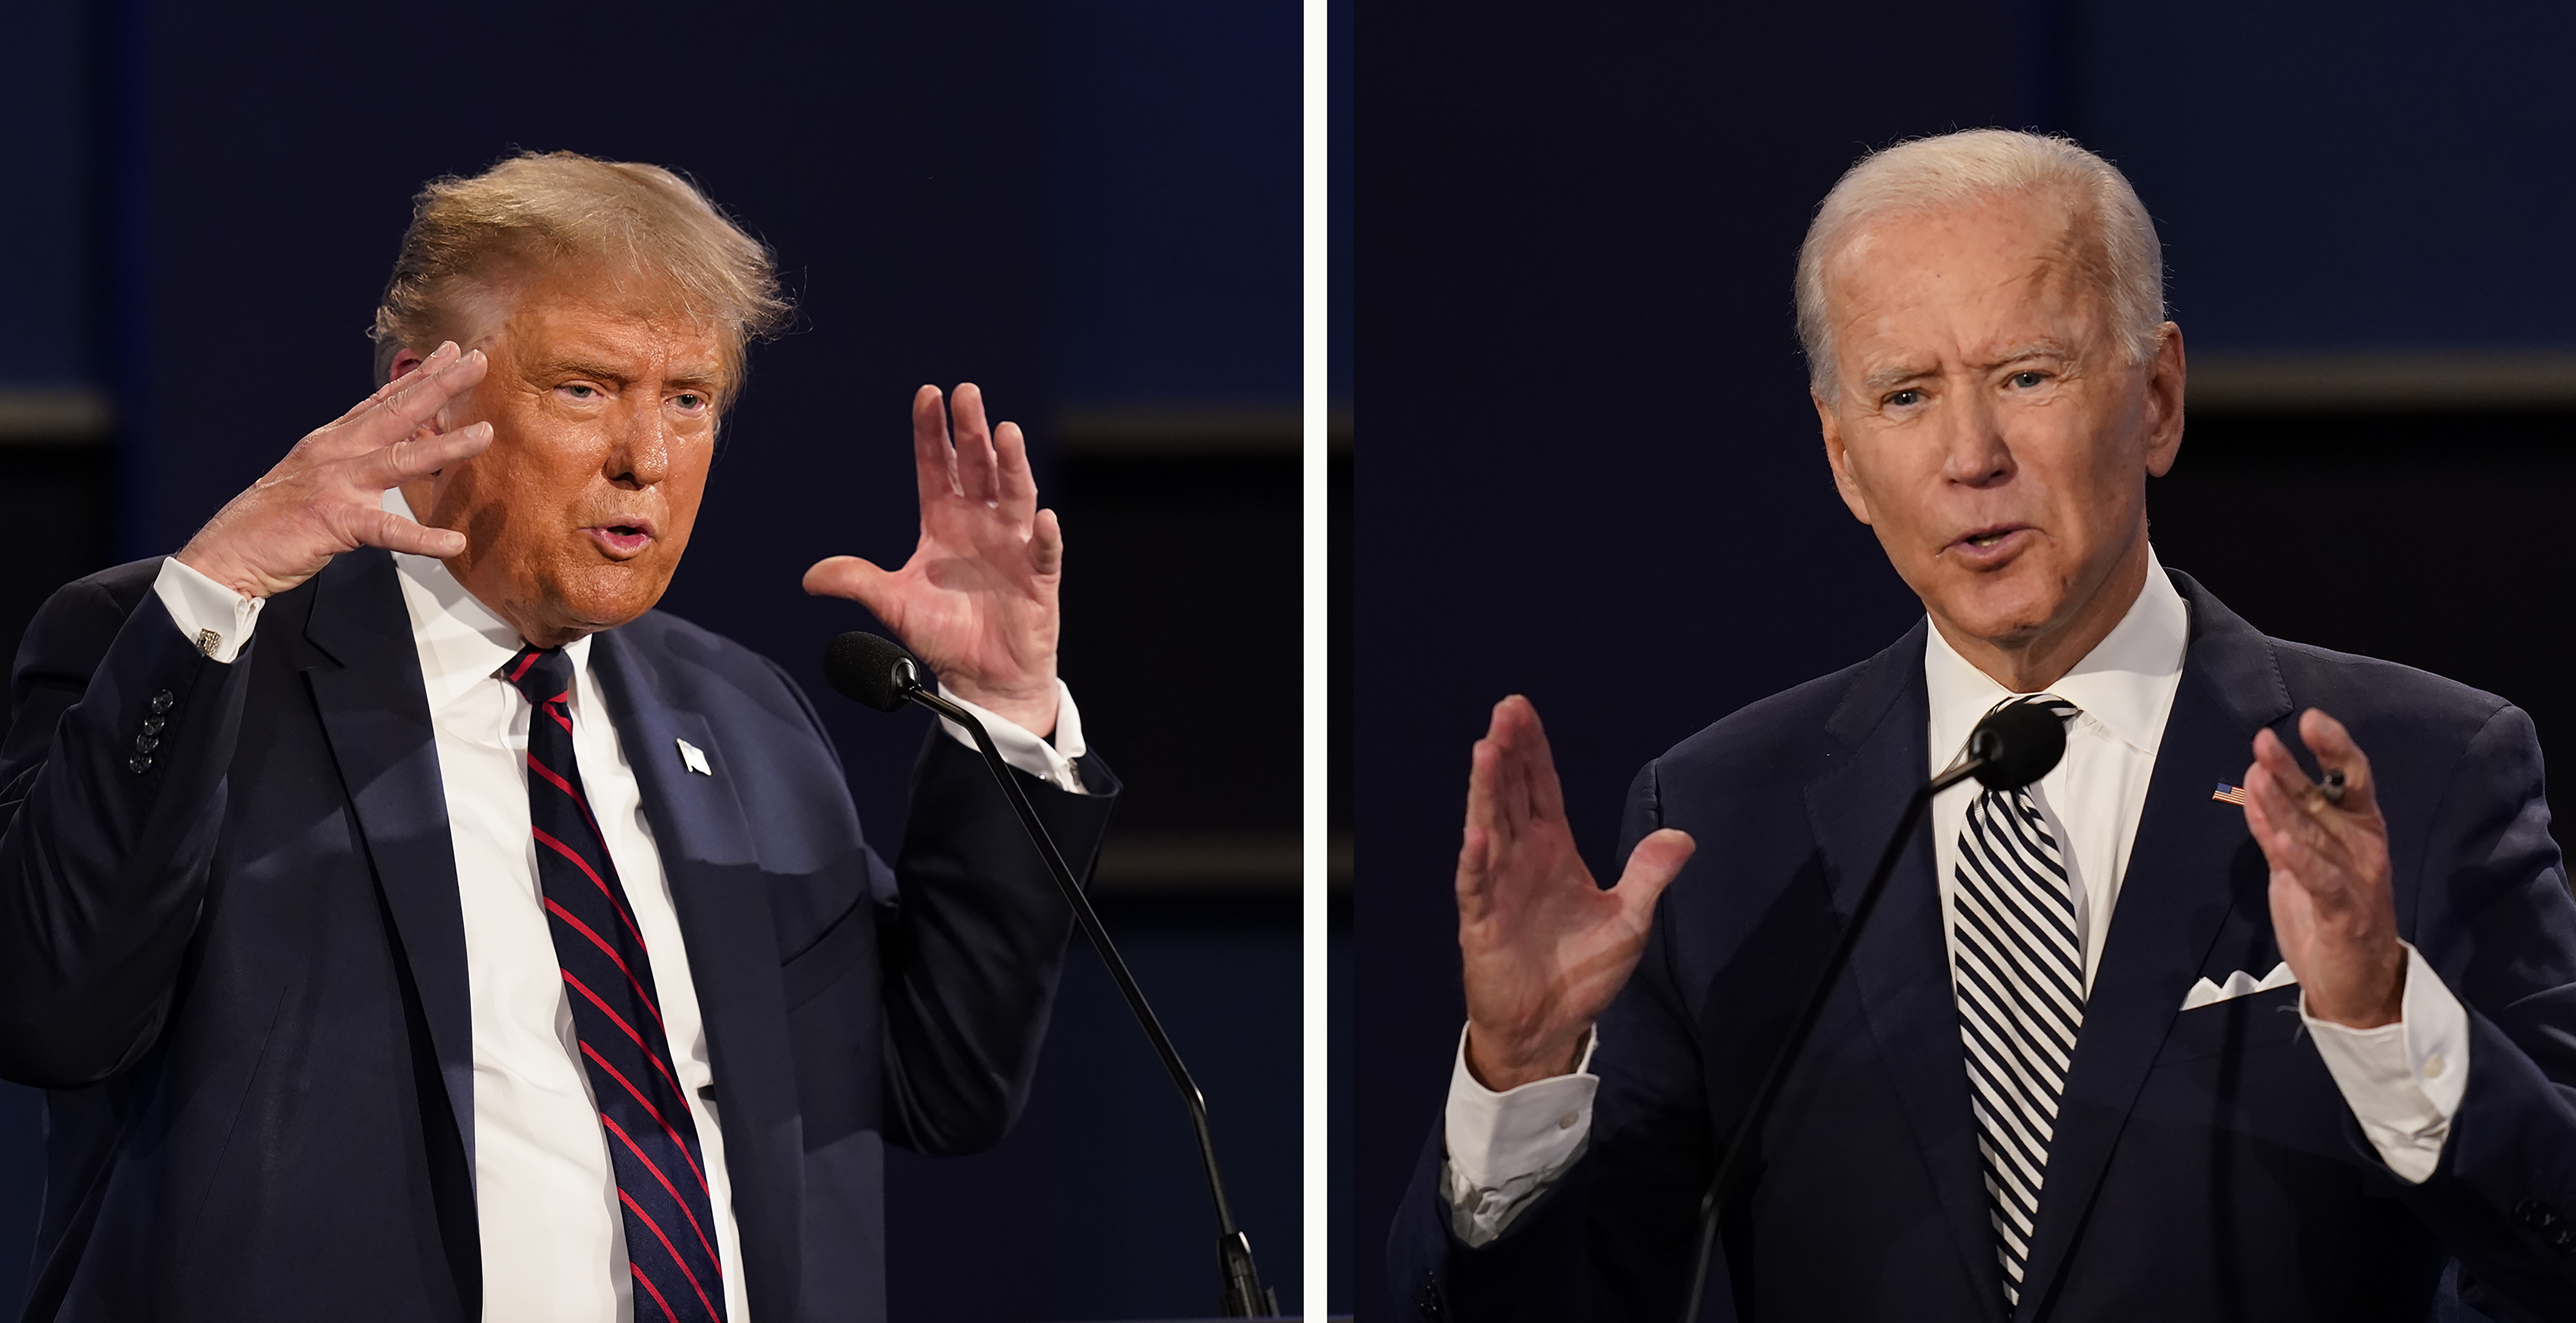 This combination of photos show President Donald Trump, left, and former Vice President Joe Biden during the first presidential debate on Sept. 29, 2020, in Cleveland. (AP Photo/Patrick Semansky, File)